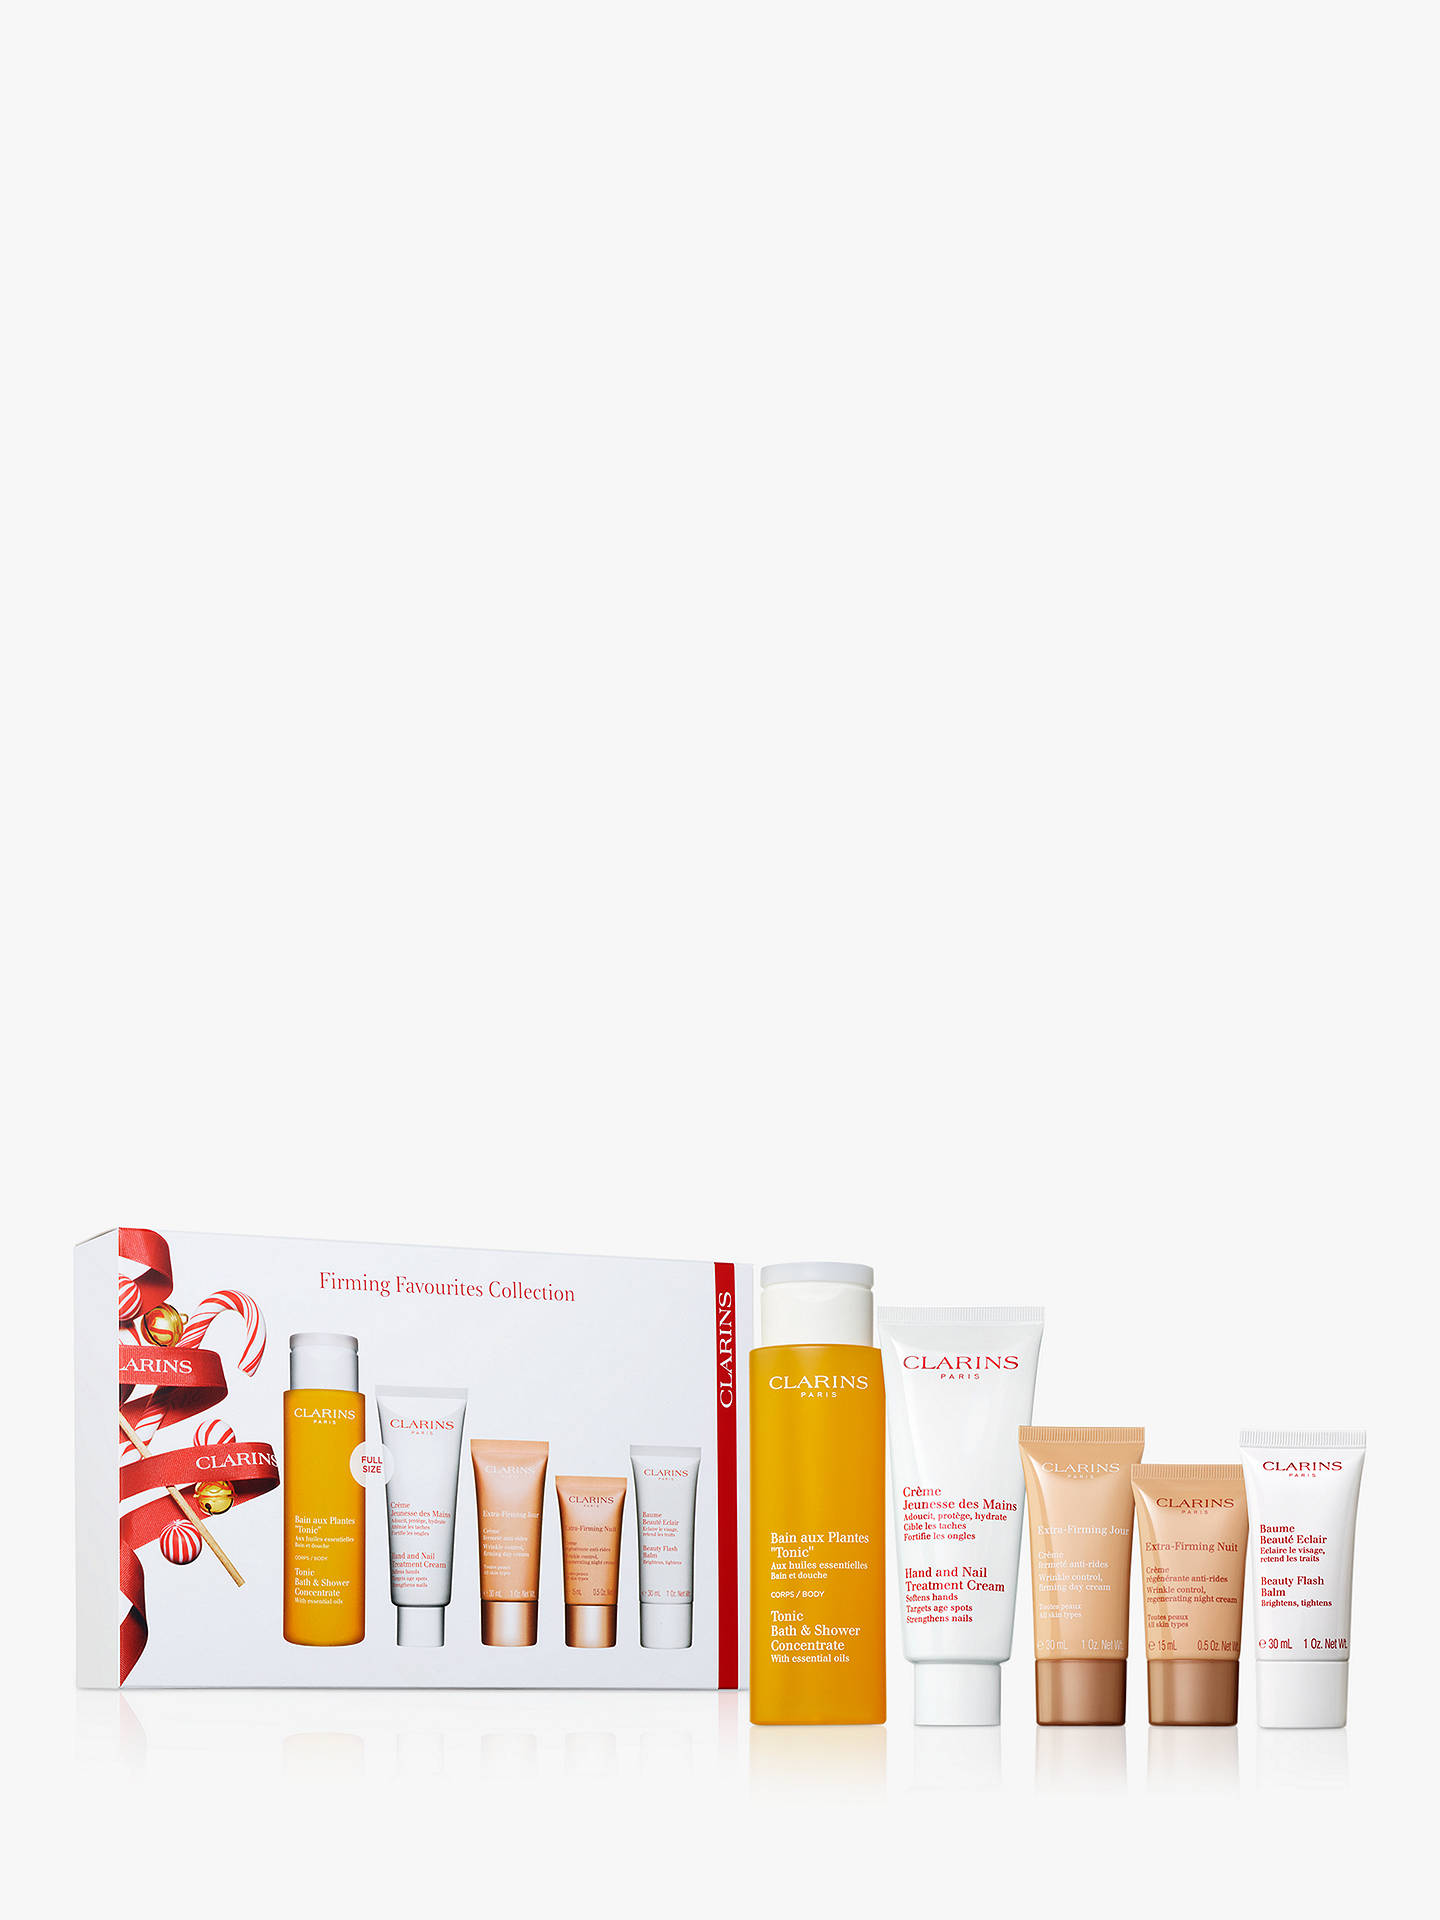 Clarins Firming Favourites Collection Black Friday